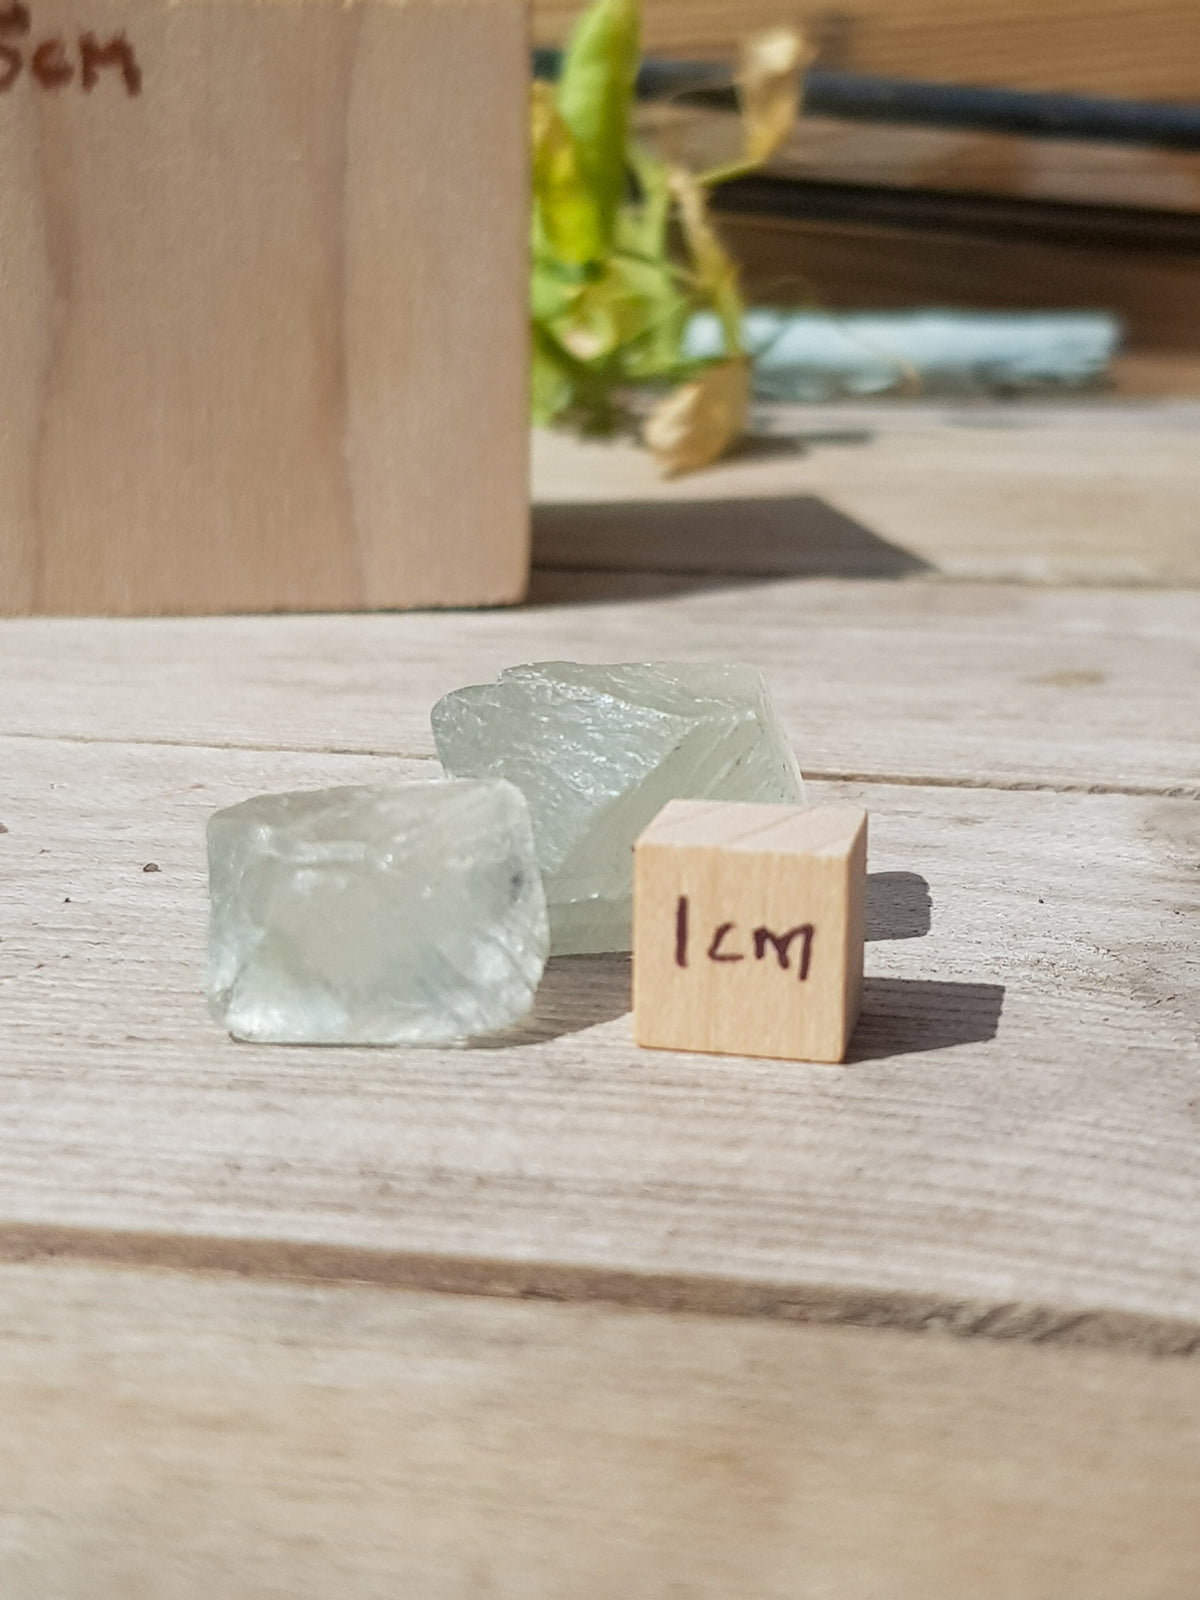 Two pale green fluorite octohedra on a wooden bench, they are next to a 1cm cube for scale. They are approximately 1.4cm cubed